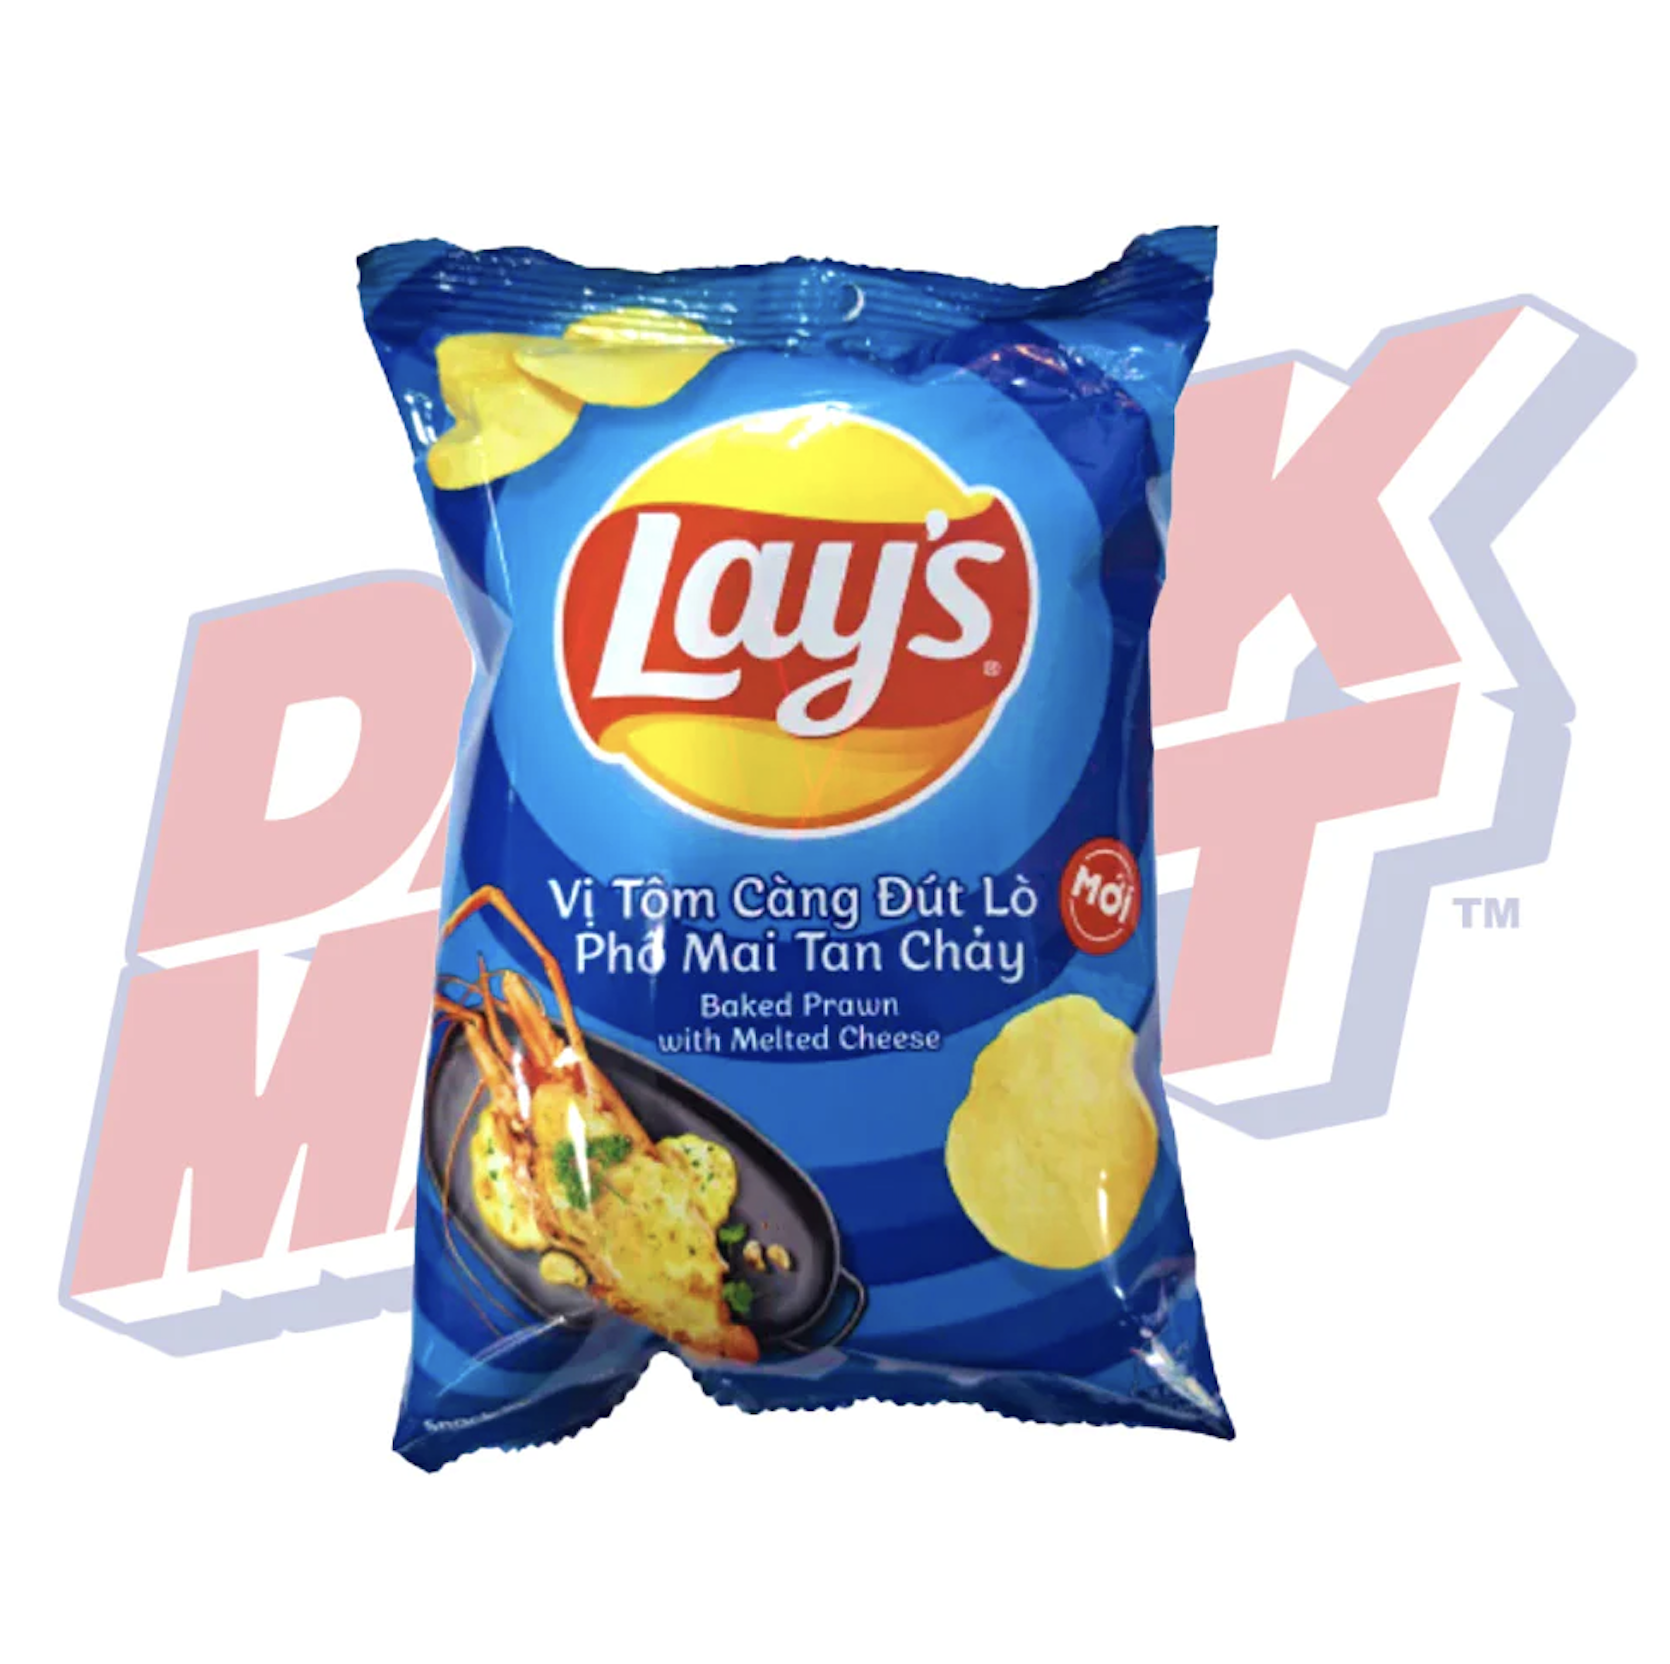 Lays Baked Prawn With Melted Cheese (Vietnam) - 54g